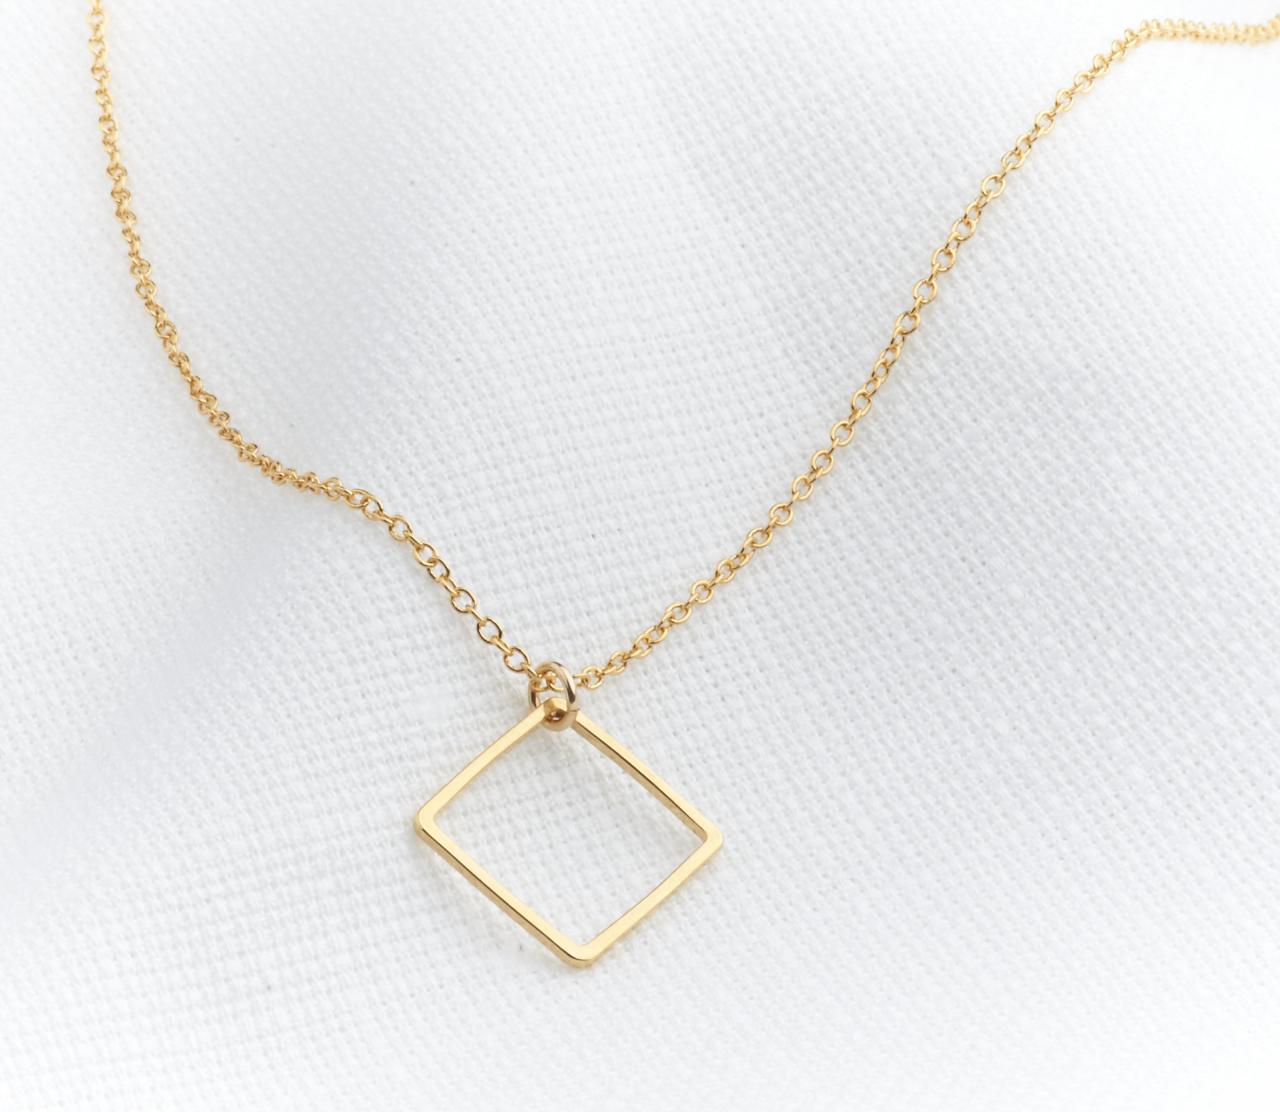 Gold necklace - Square gold necklace, Minimalist geometric necklace, Fashion jewelry, Modern necklace, Everyday gold necklace